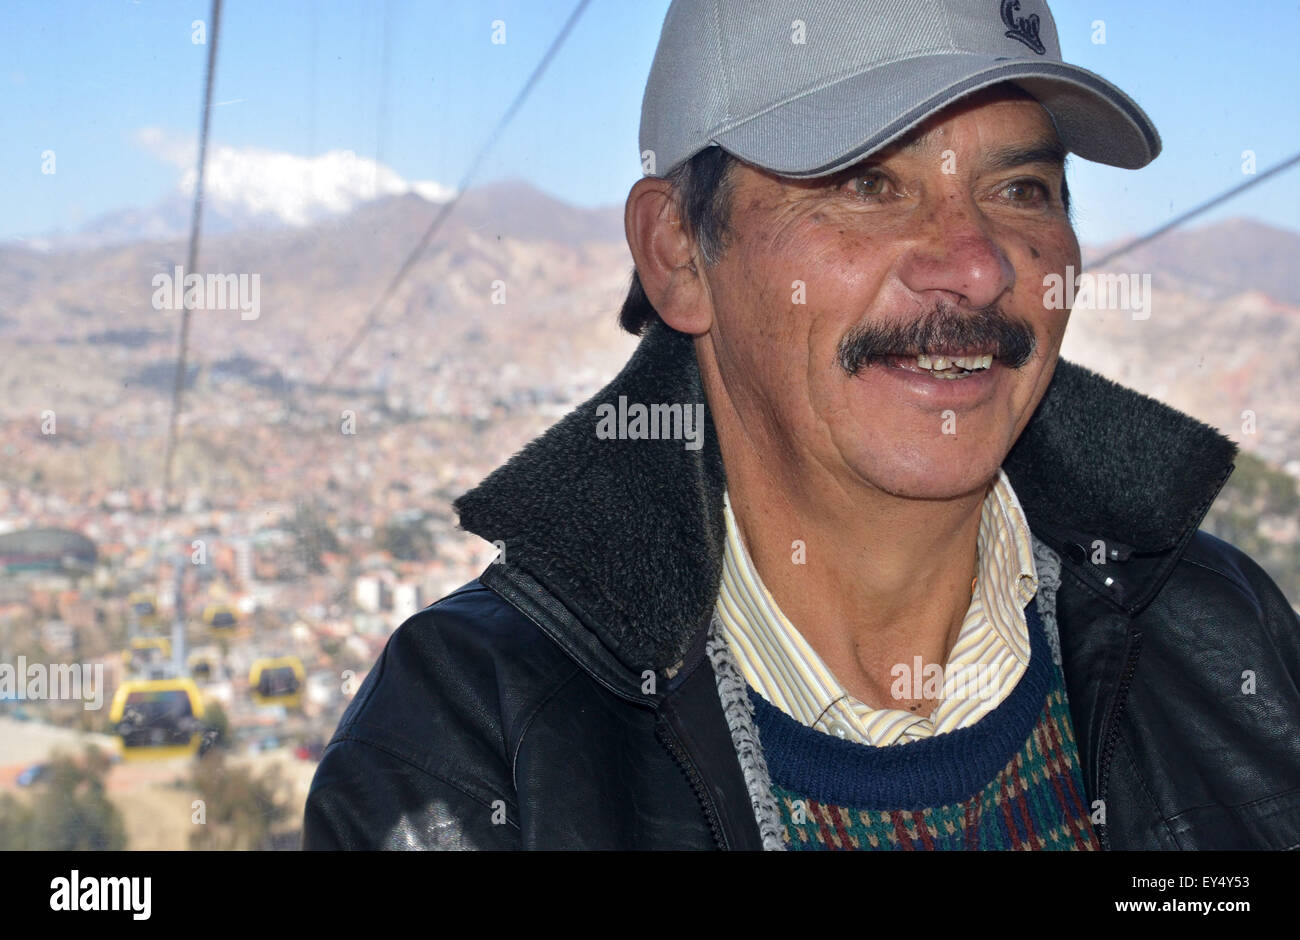 60-year-old teacher <b>Mario Mendes</b> takes the yellow cable car line to commute - 60-year-old-teacher-mario-mendes-takes-the-yellow-cable-car-line-to-EY4Y53